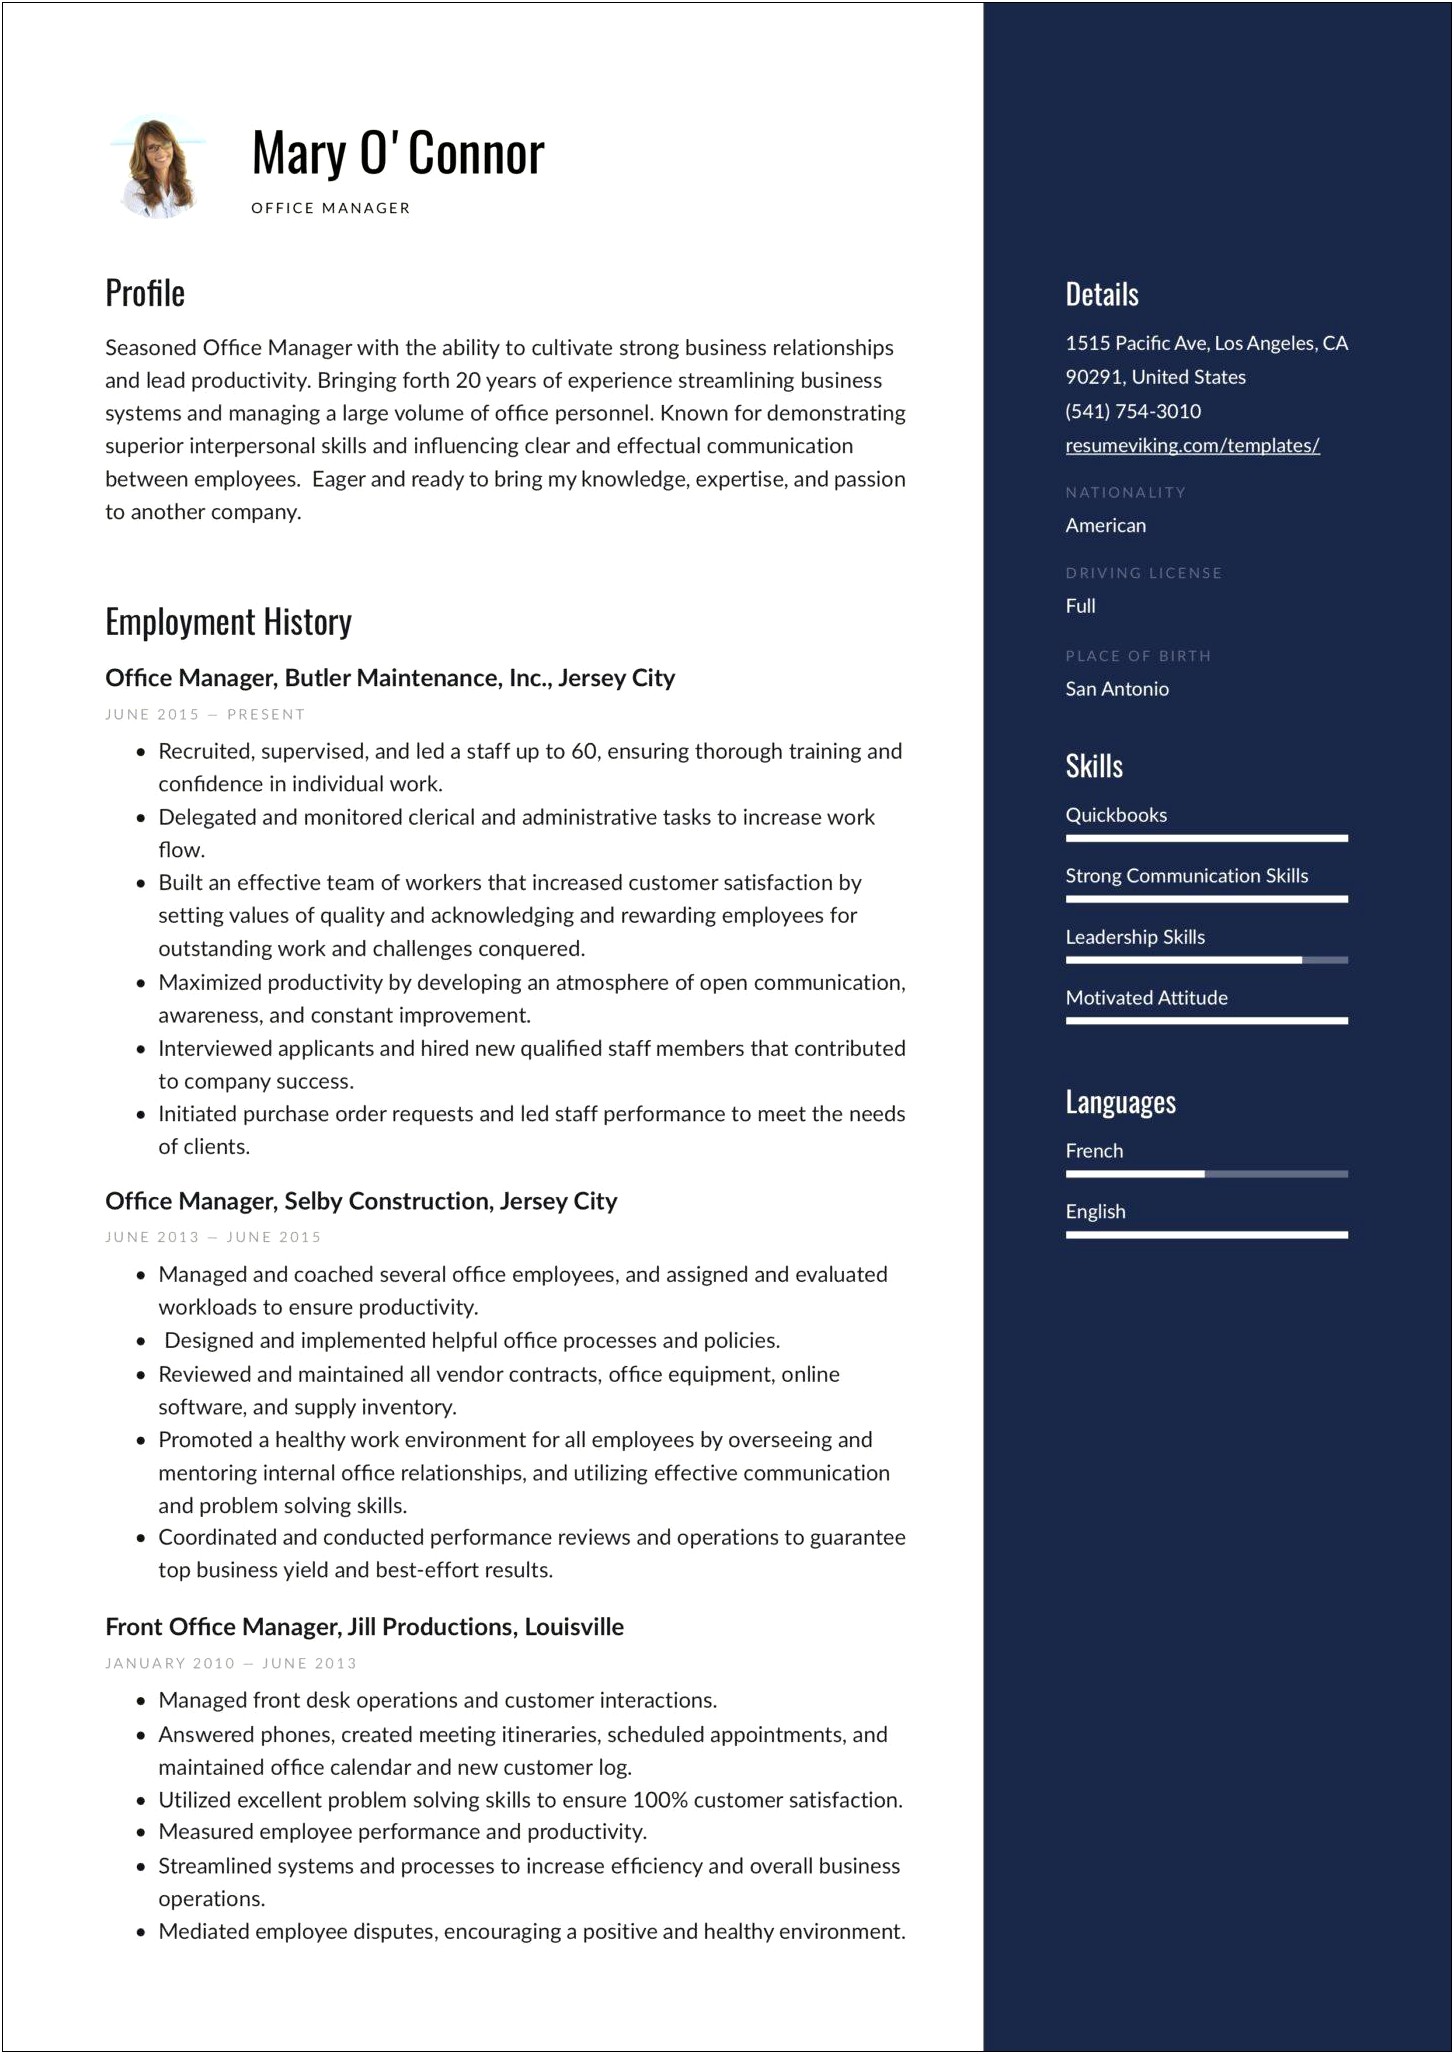 Great Resume To Get An Office Managers Job